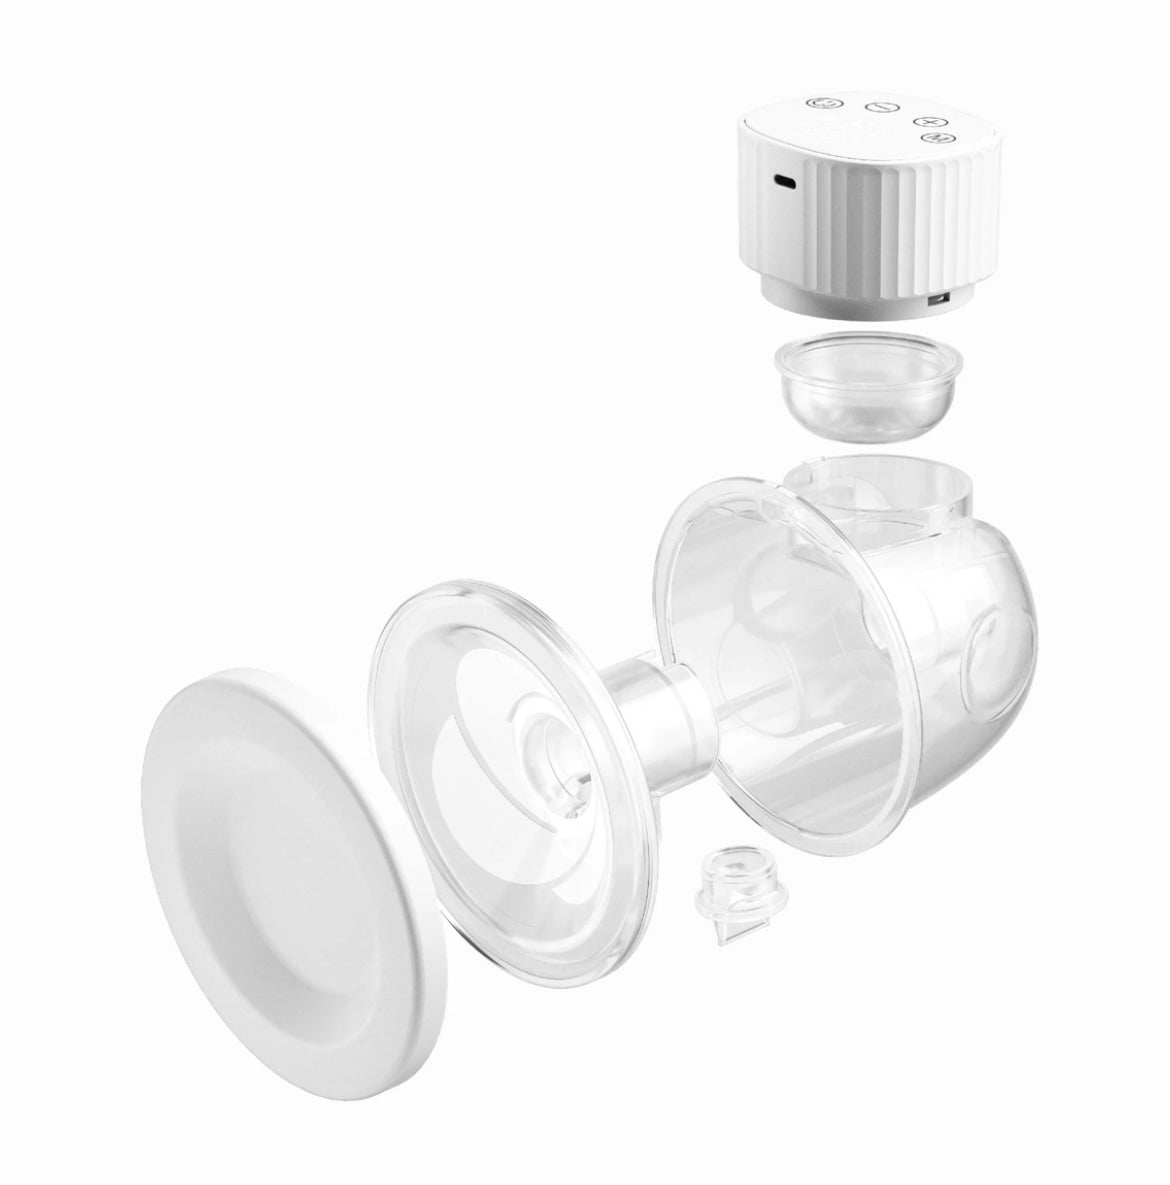 LACTIVATE ARIA WEARABLE BREAST PUMP